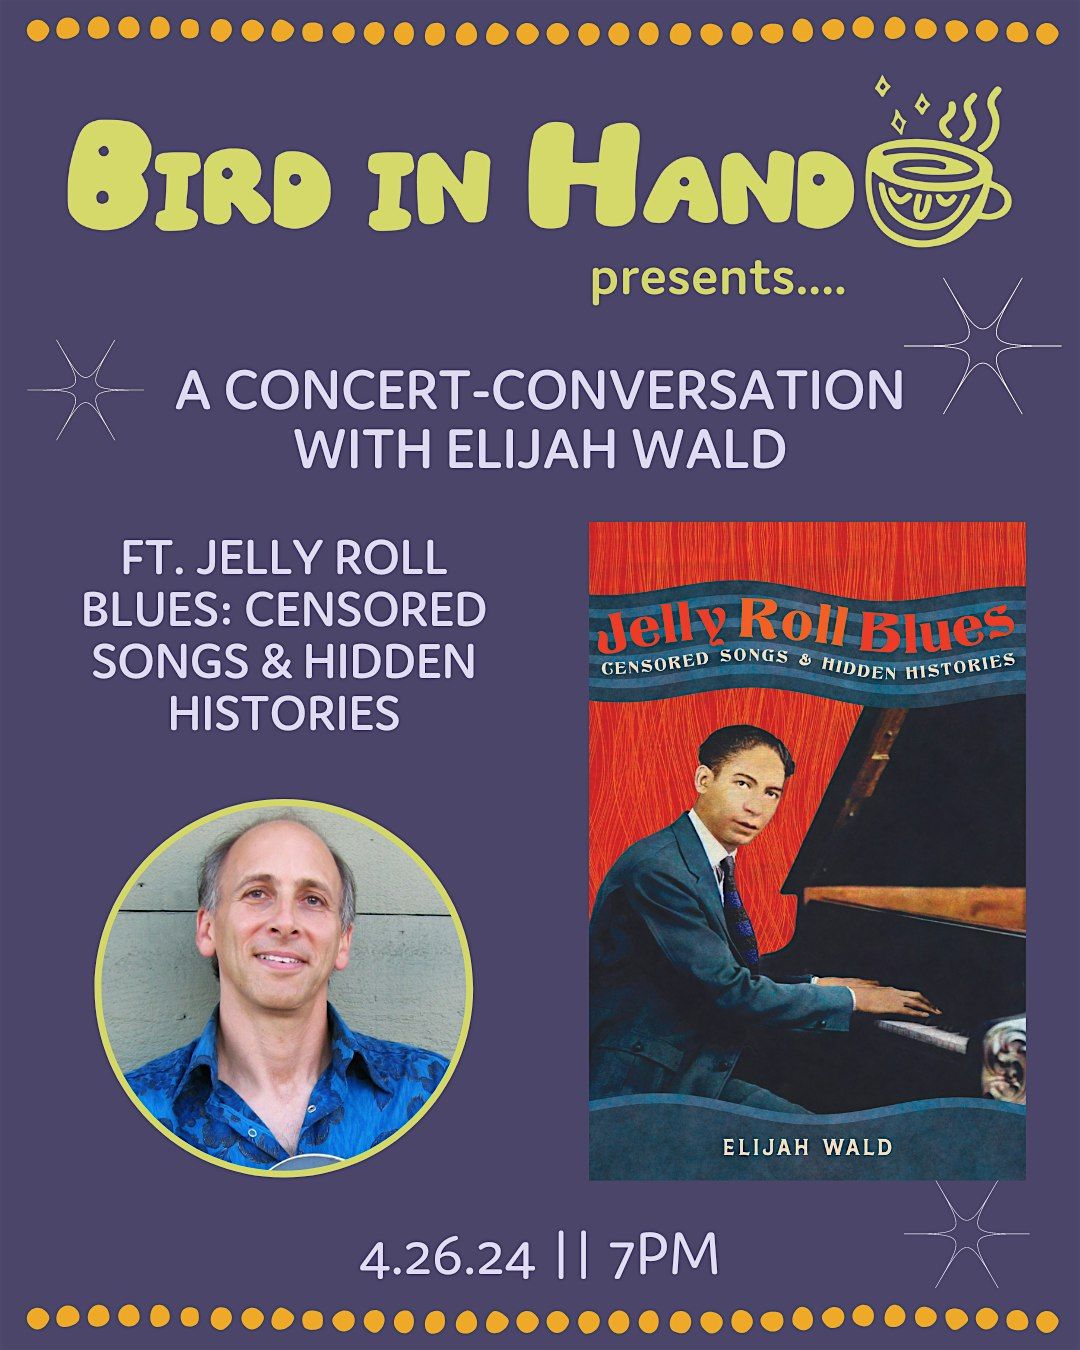 A Concert-Conversation with Elijah Wald: Jelly Roll Blues